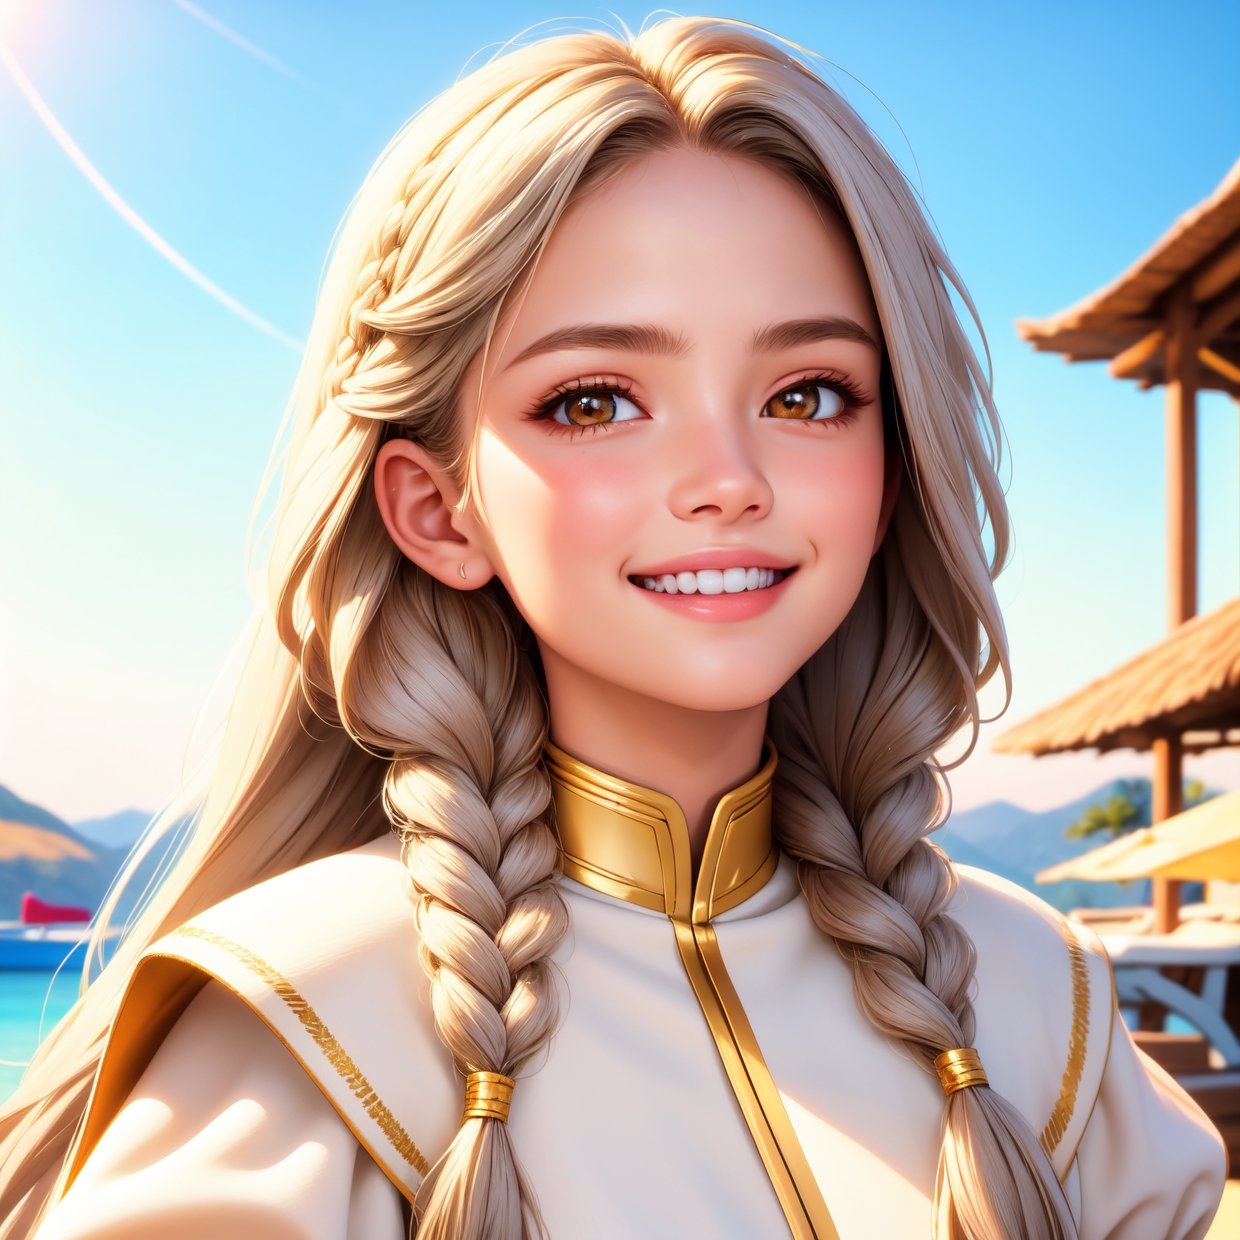 Top quality, high image quality, masterpiece, gray hair, golden eyes, white clothes, looking up, upper body, hair strands, fair skin, side braids, smiling, double teeth
